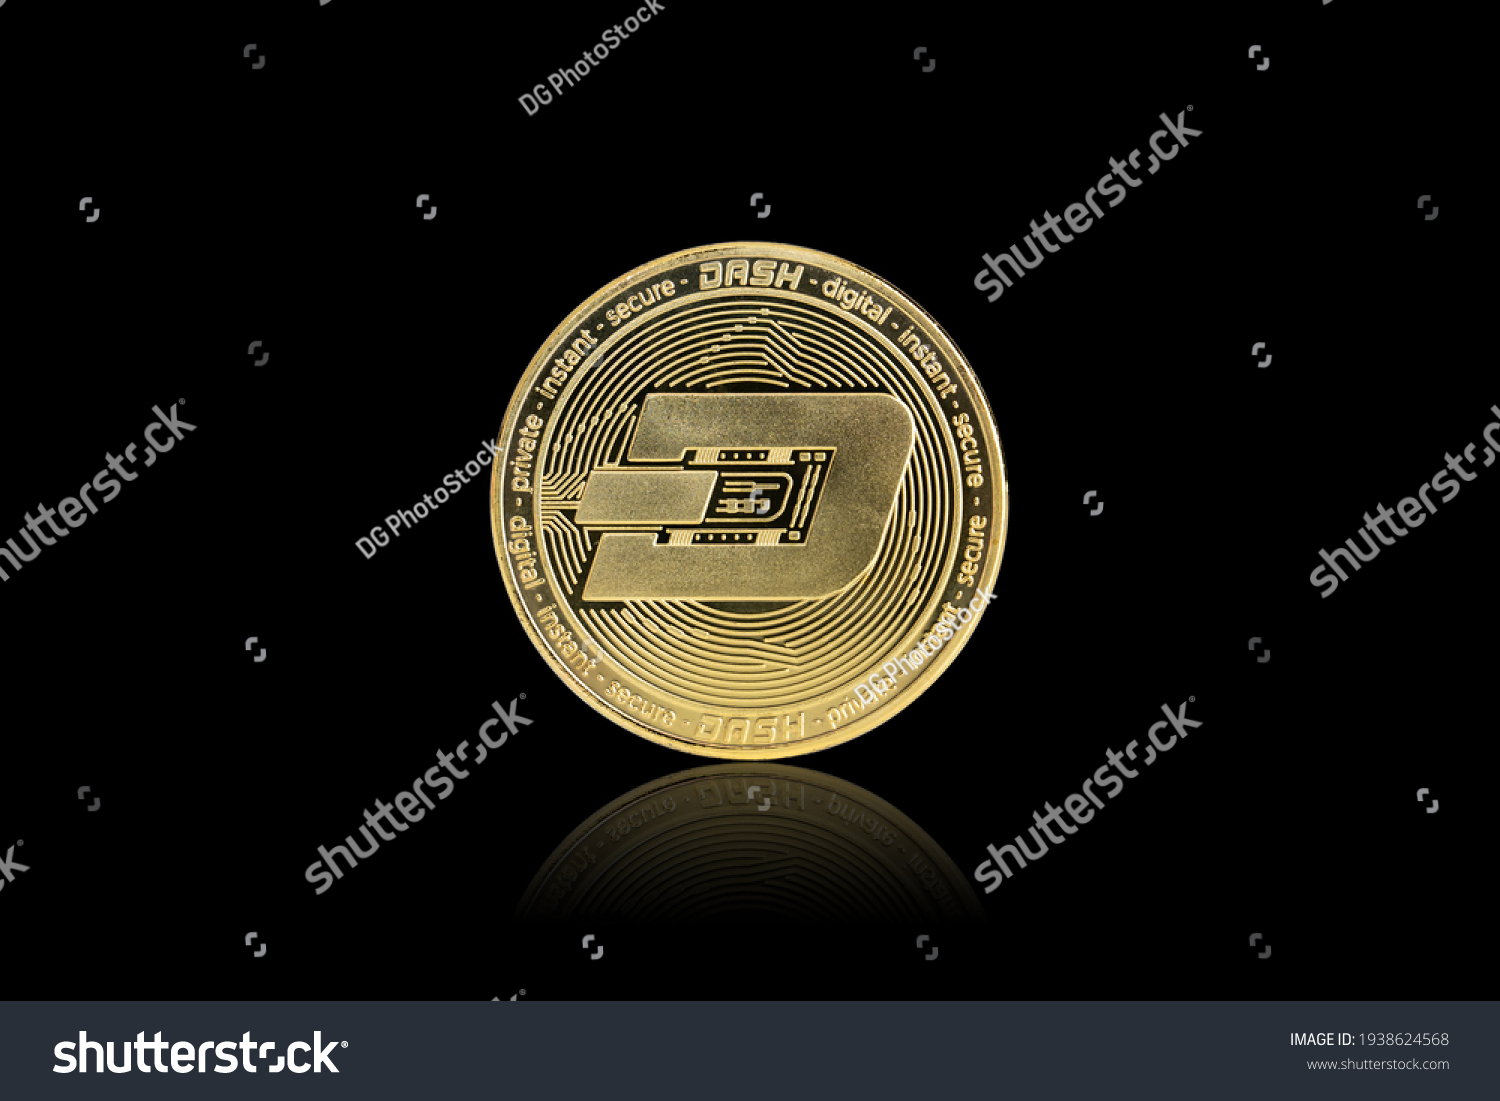 Isolated with clipping path, the golden DASH Coin symbol close up. DASH coin is one of the digital currency - cryptocurrency driven by blockchain technology. #1938624568